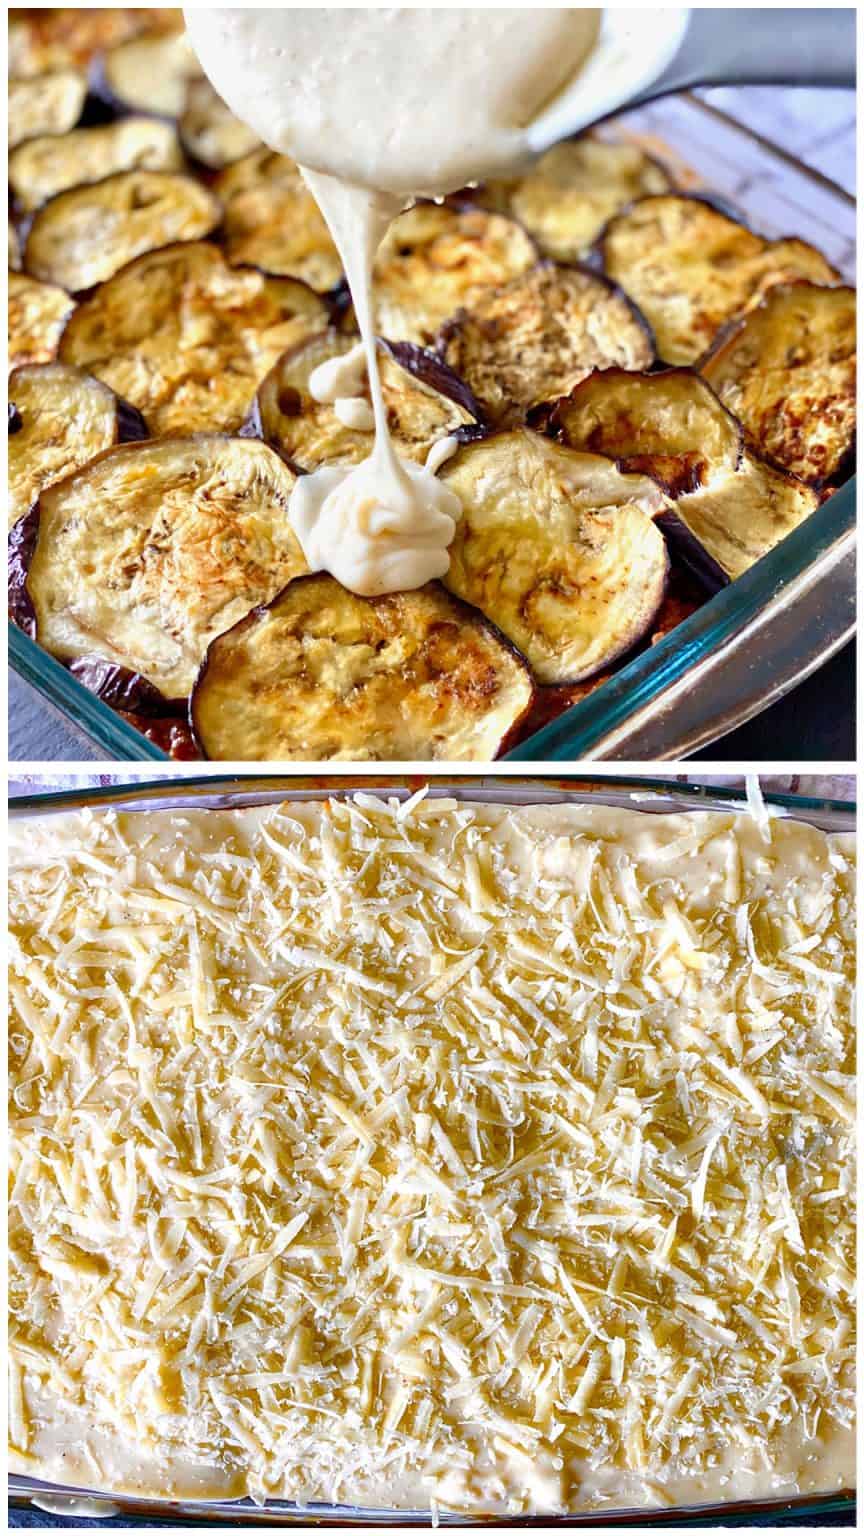 Traditional Moussaka recipe with eggplants (aubergines) and potatoes ...